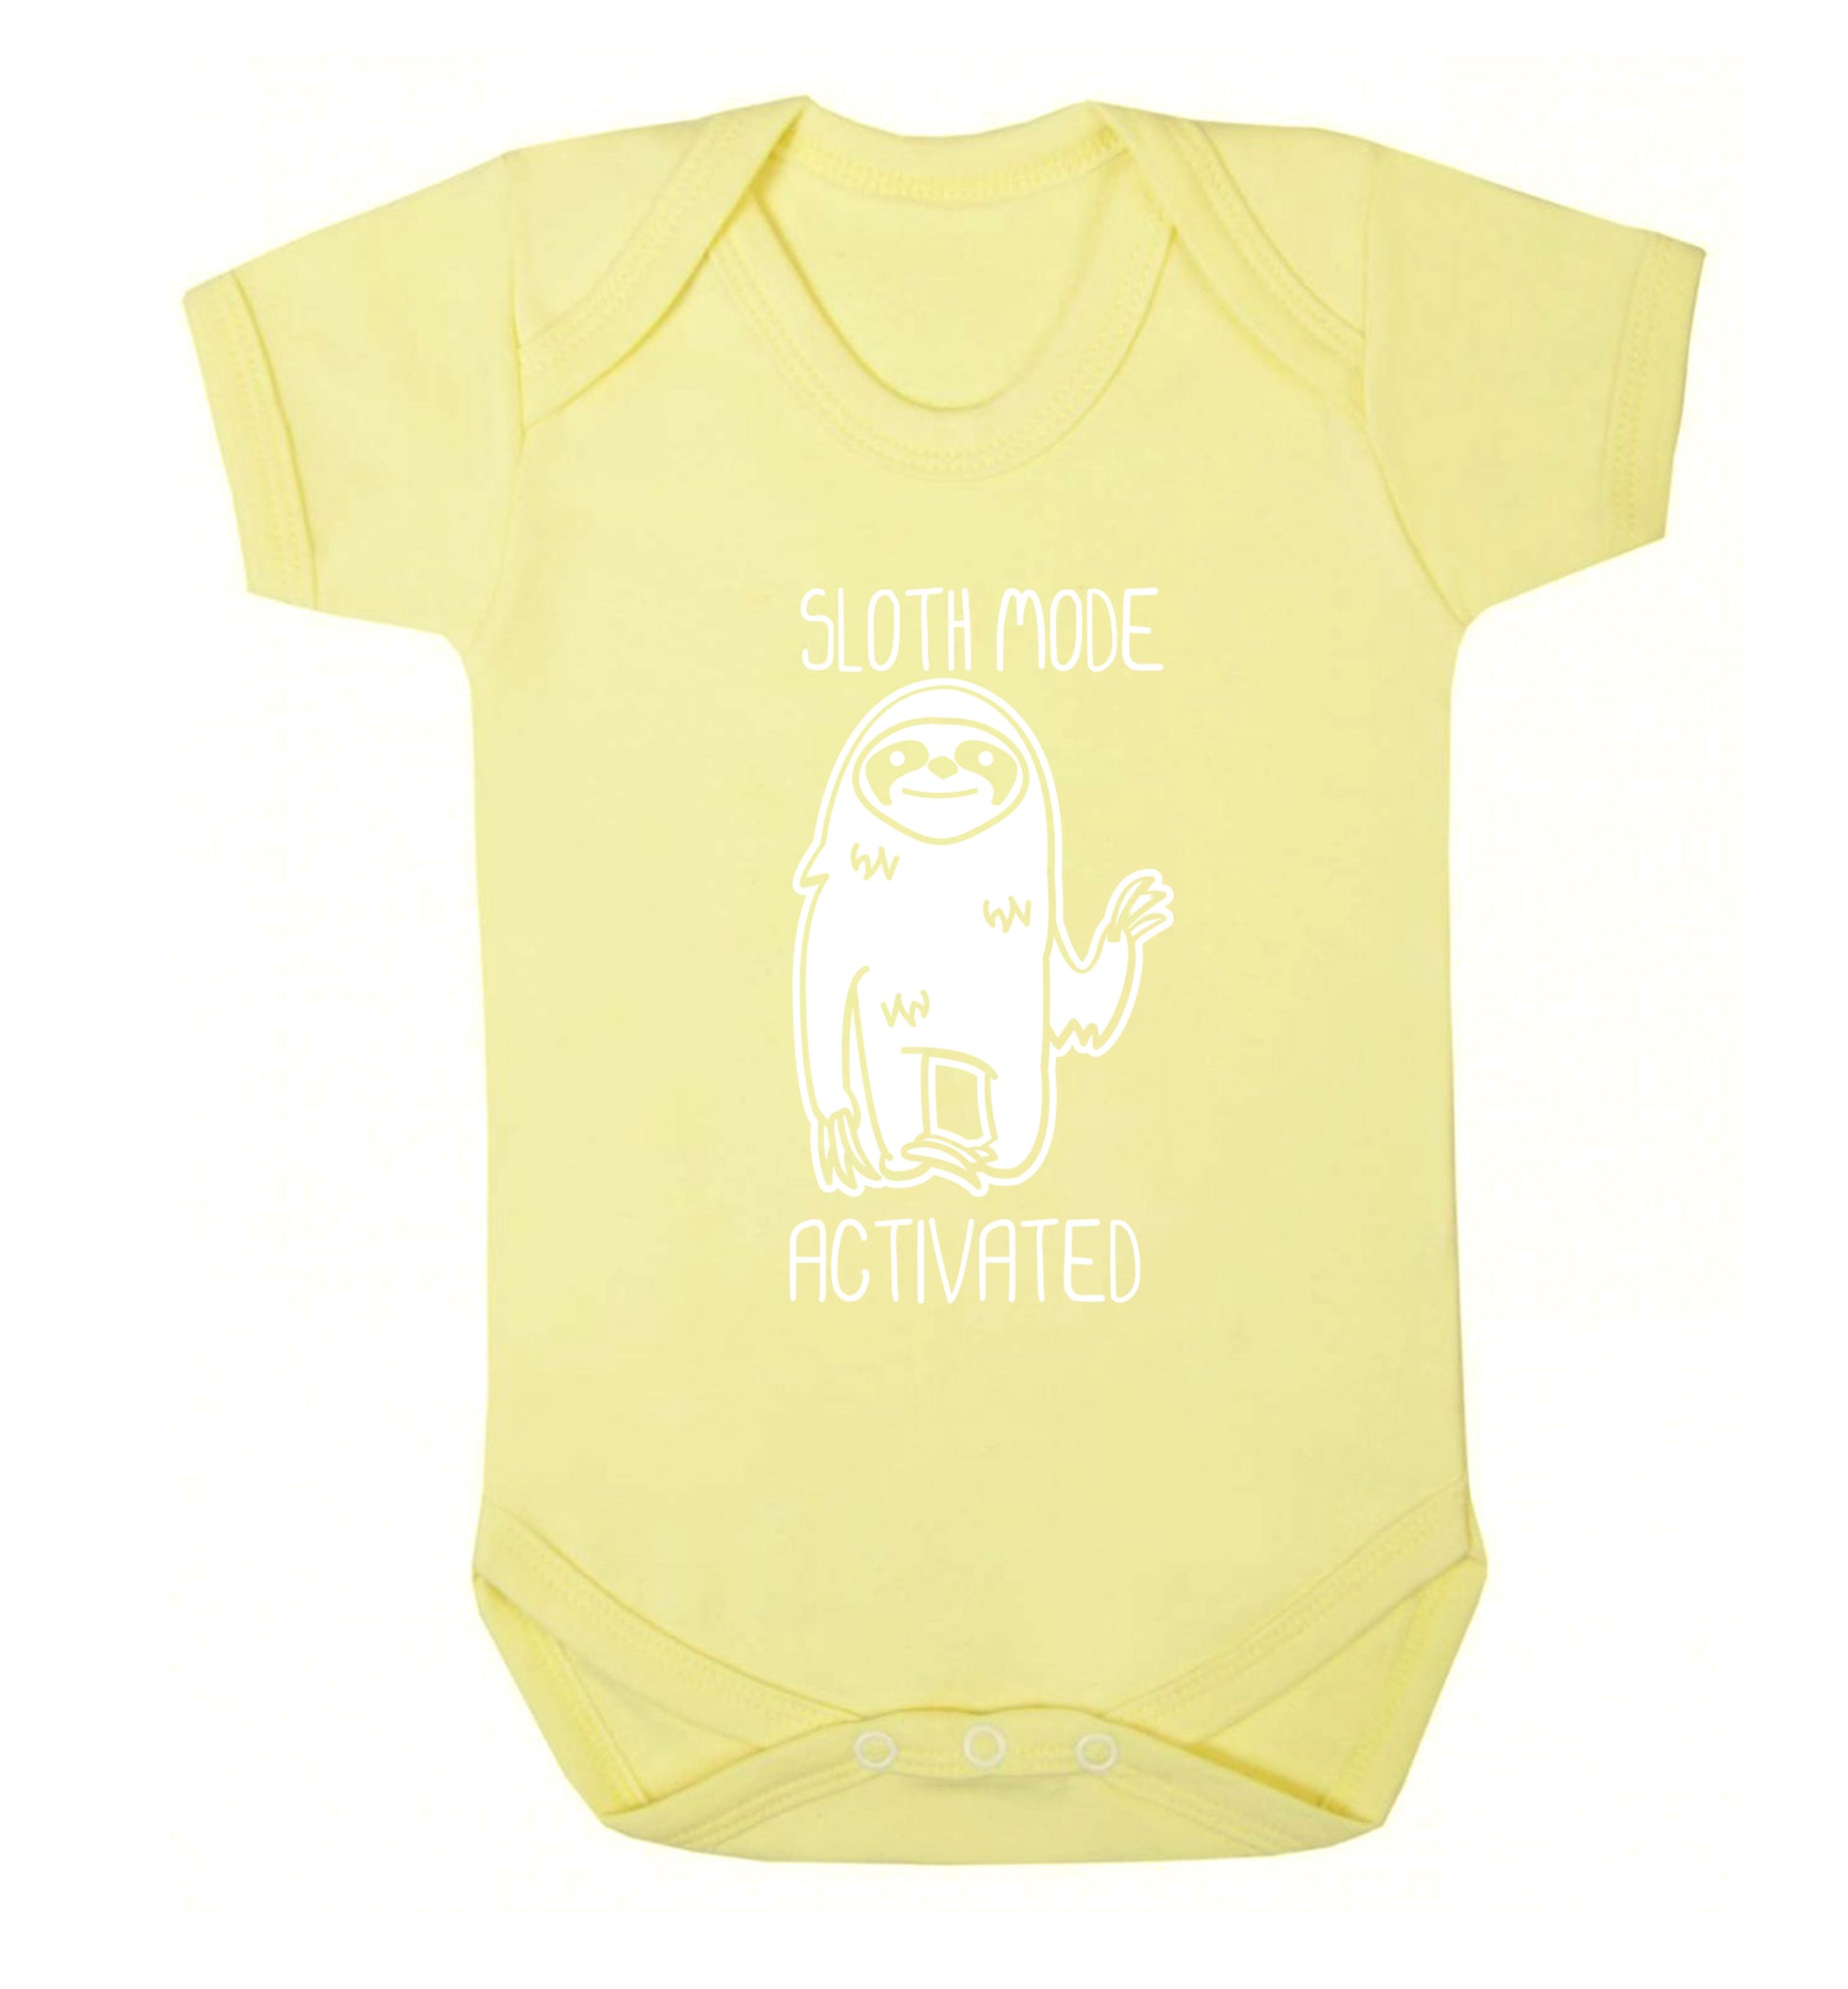 Sloth mode acitvated Baby Vest pale yellow 18-24 months